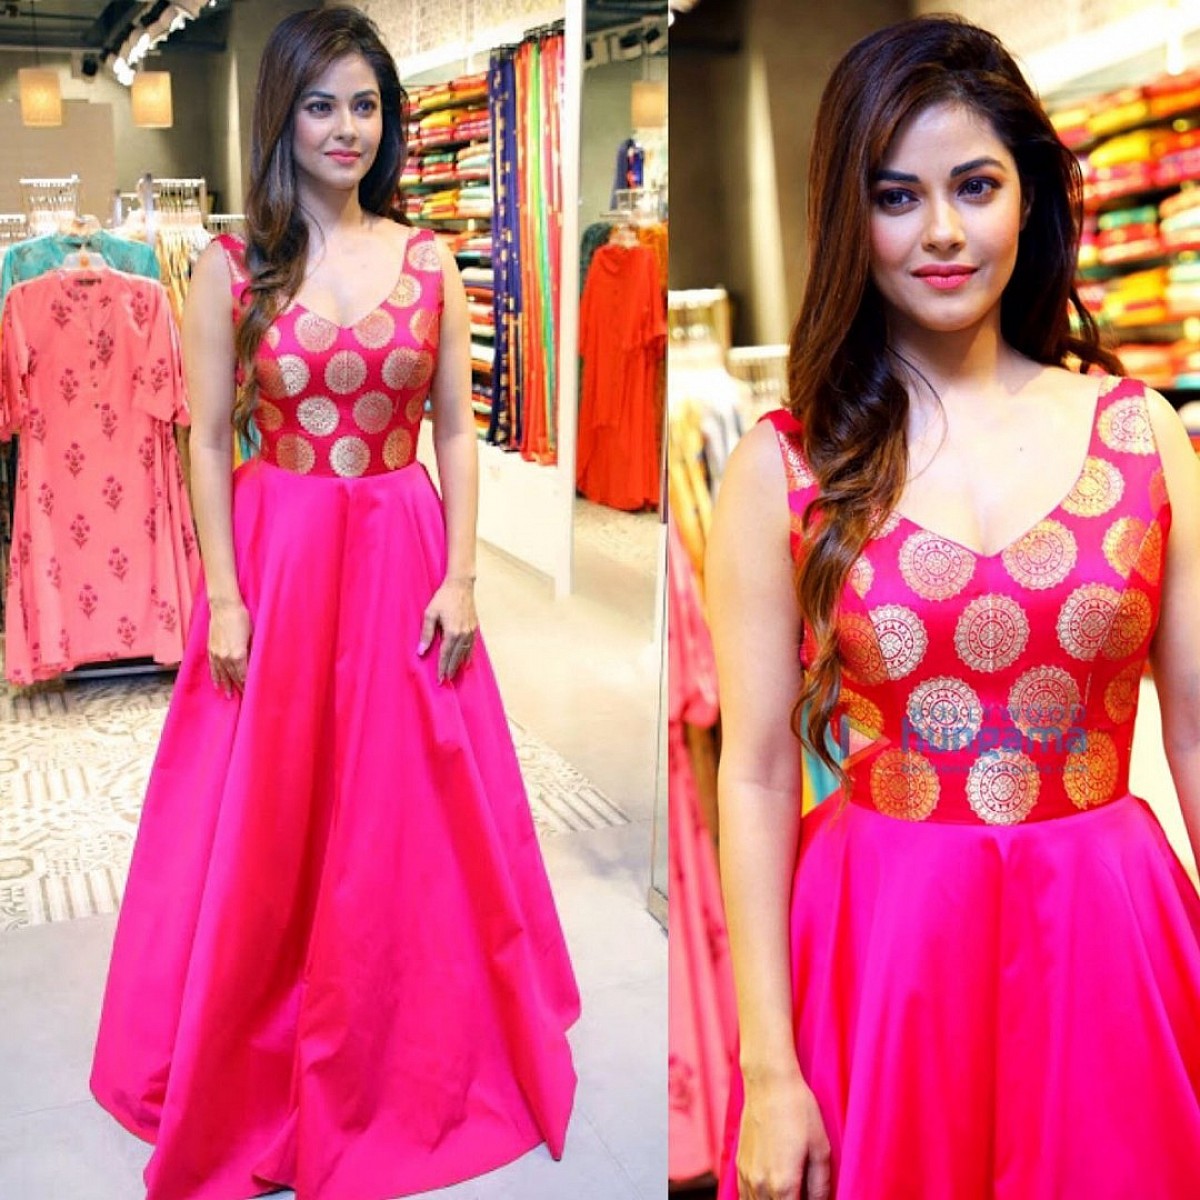 Gown : pink tapeta and jquard silk partywear gown - Fash ...